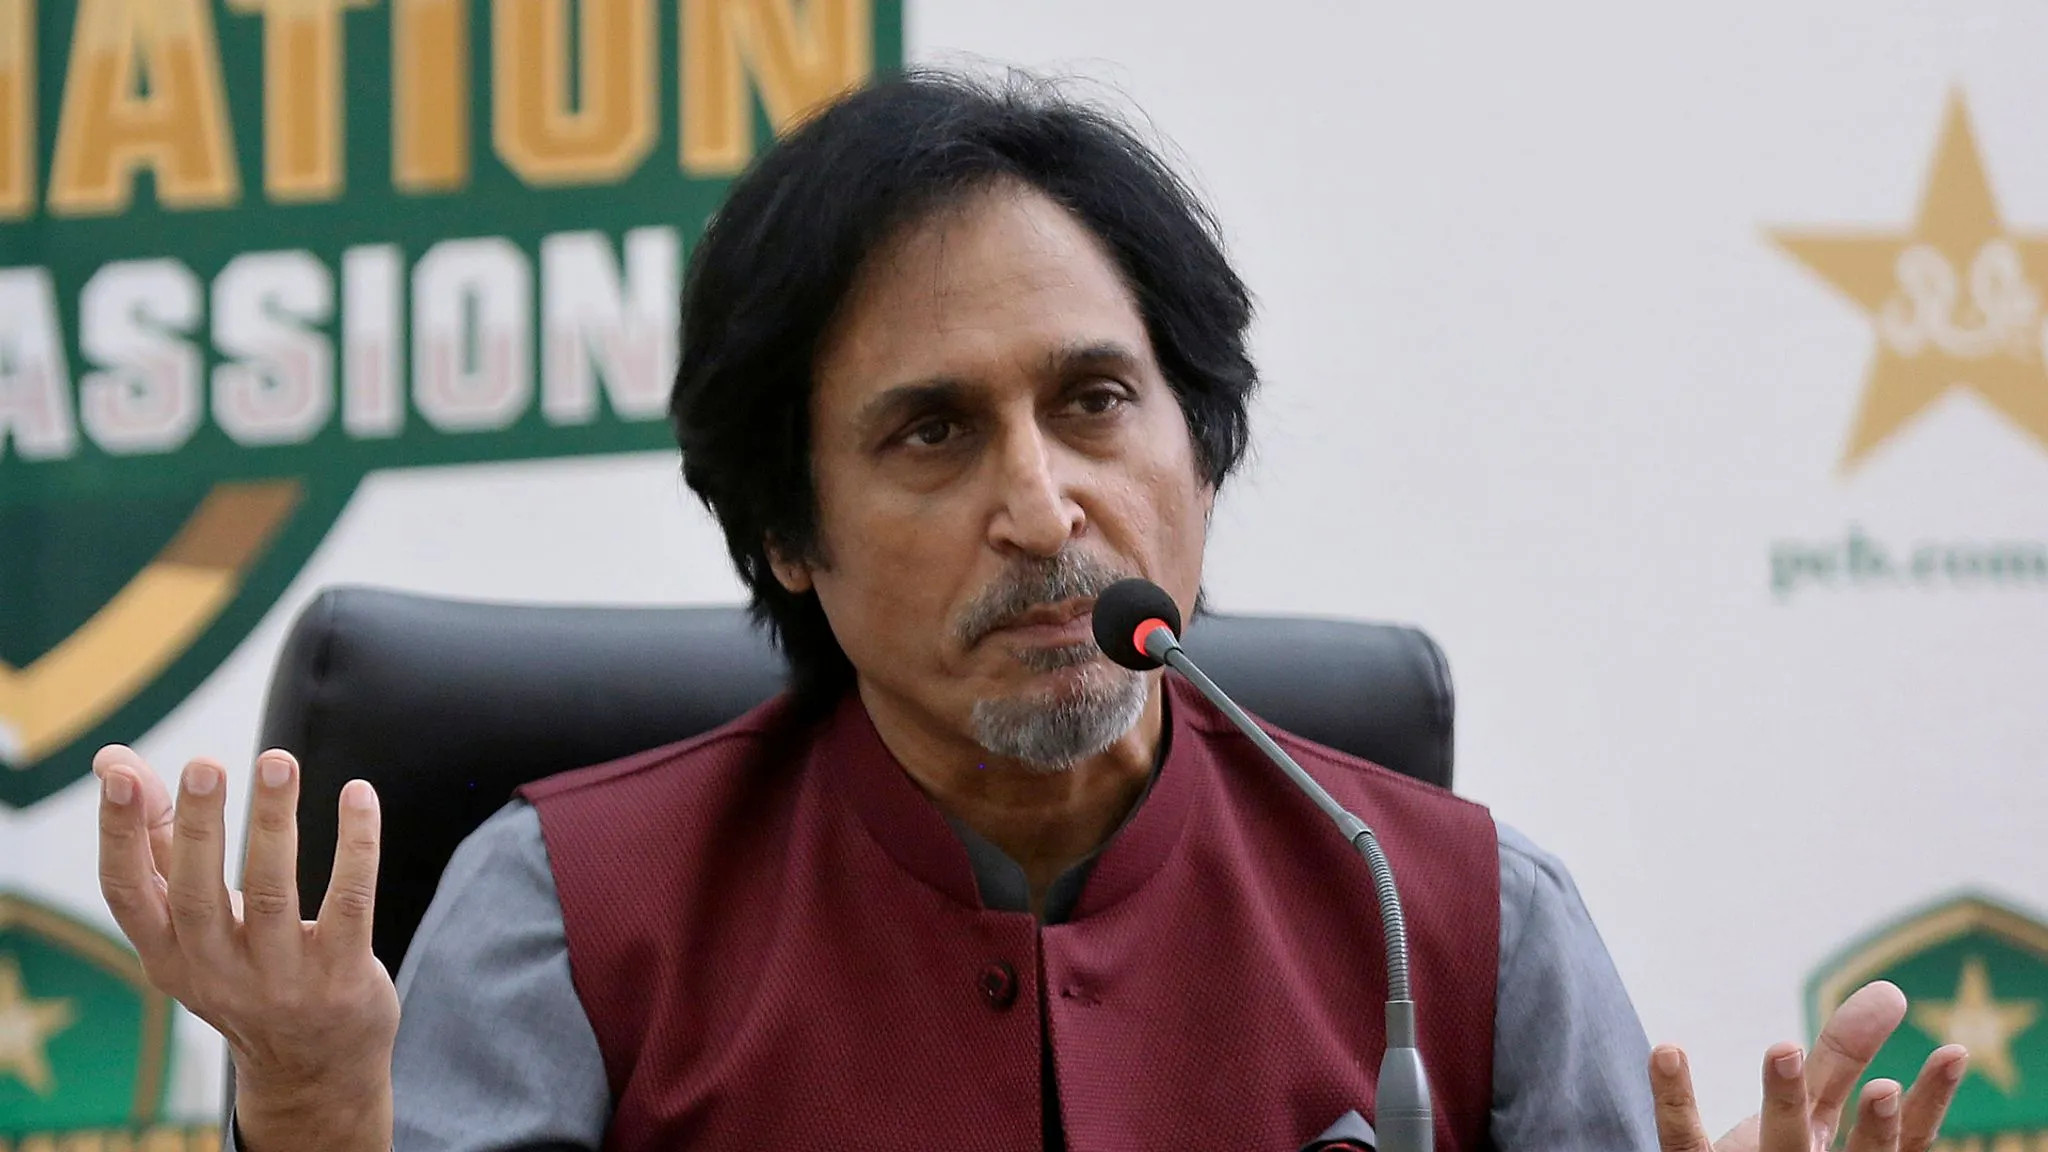 Ramiz Raja’s proposal for 4-nation T20I series rejected unanimously at ICC meeting- Report